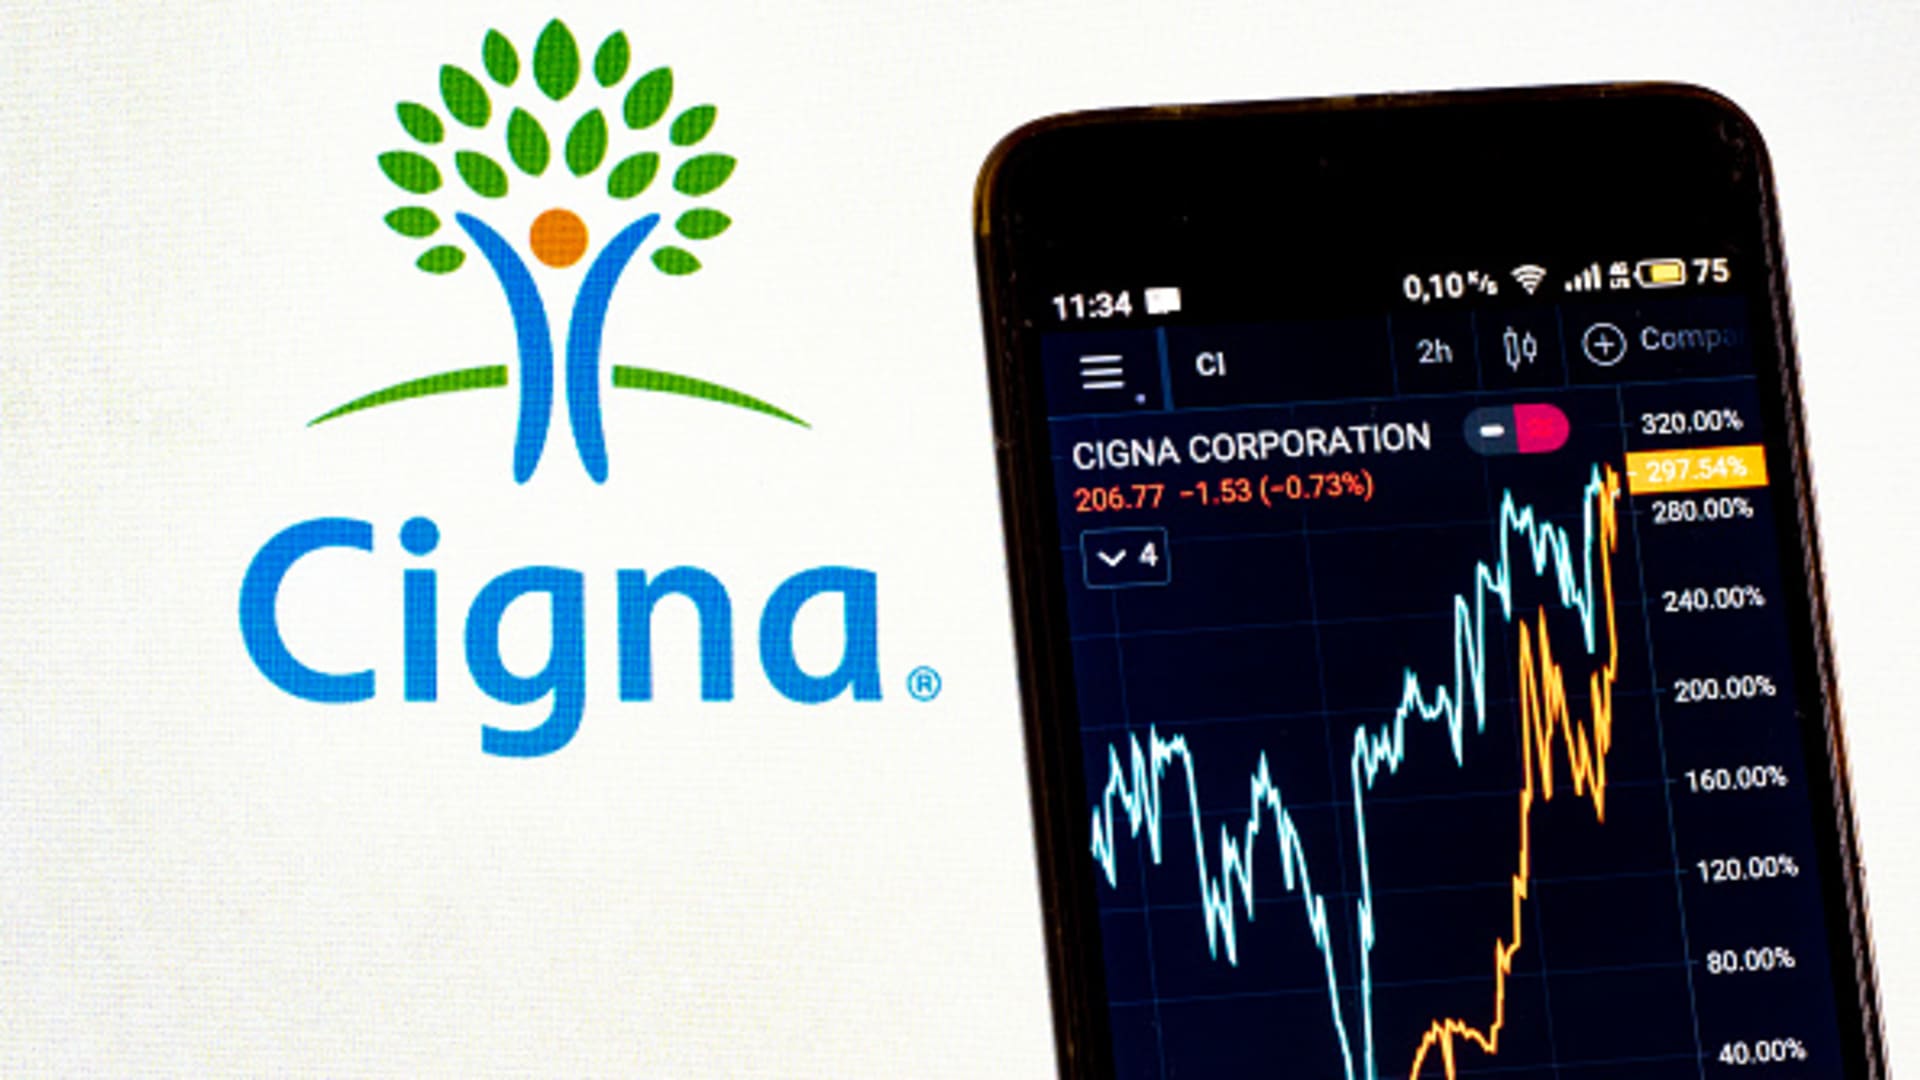 Cigna shares jump on reports of abandoned Humana buyout, plans for $10 billion stock buyback